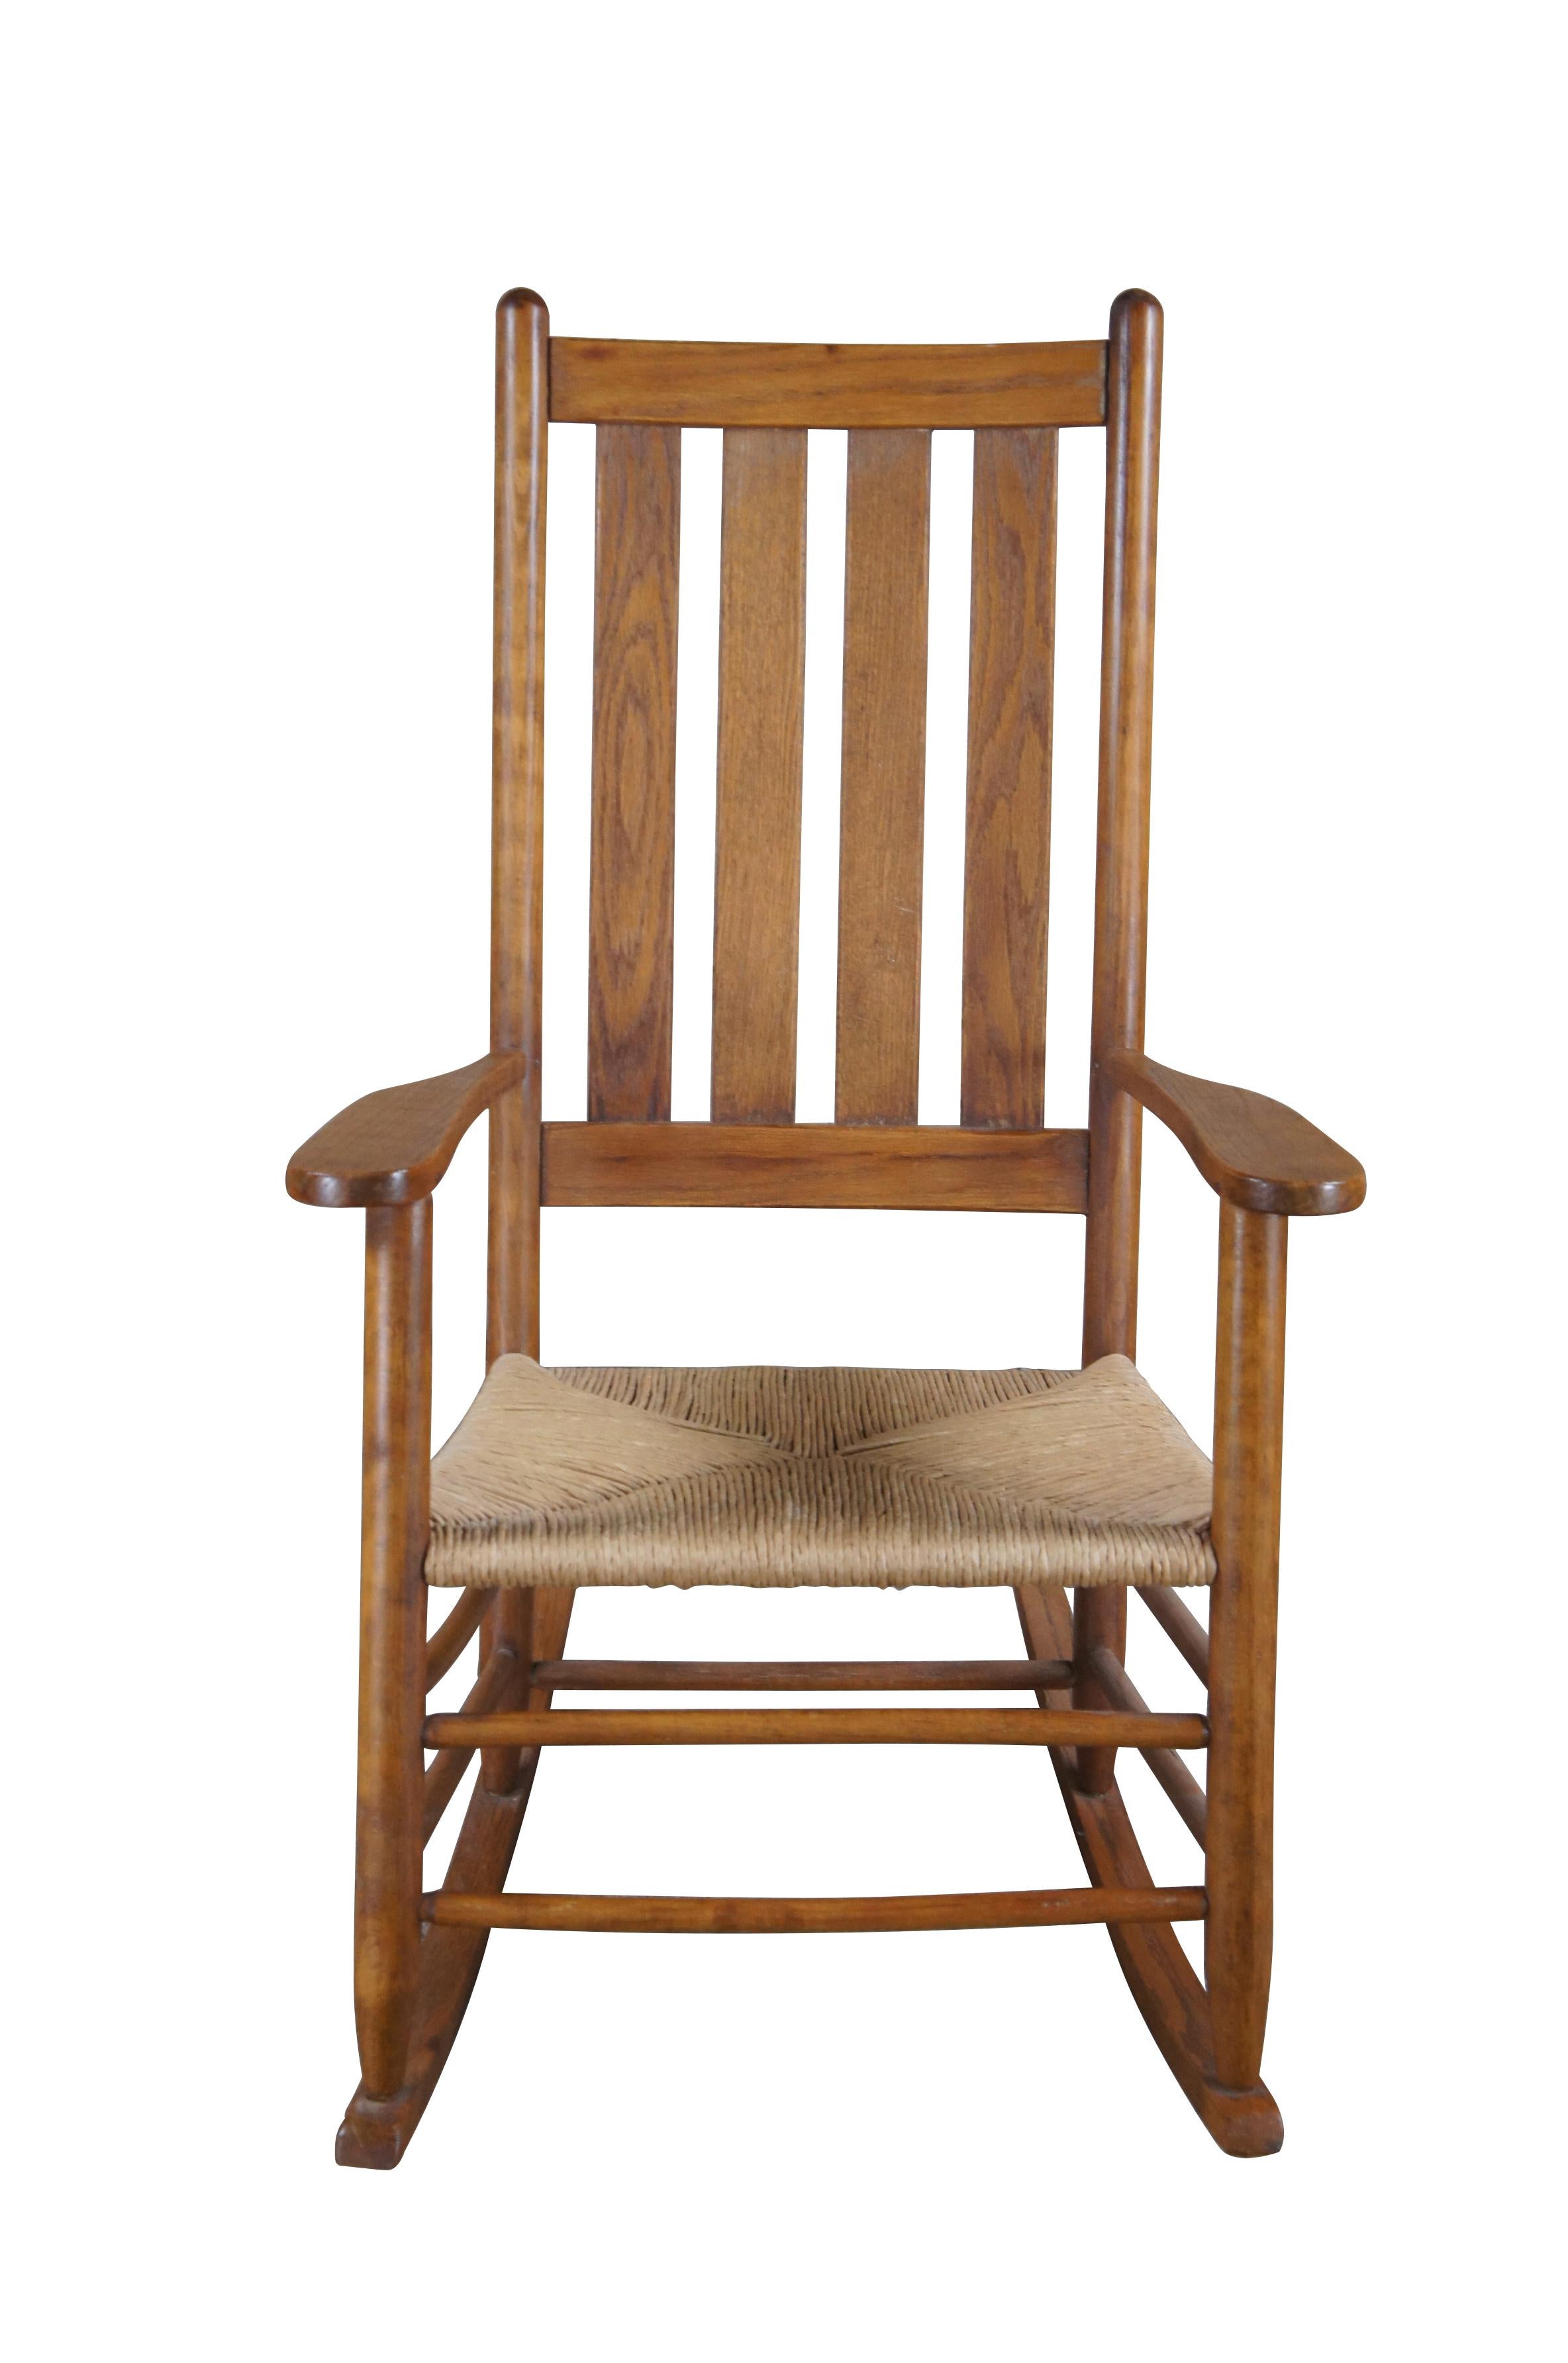 Solid oak American Country / Farmhouse rocking chair.  Features a slat back and woven rush seat.  Includes optional cushions for added comfort. 

Dimensions:
24.5